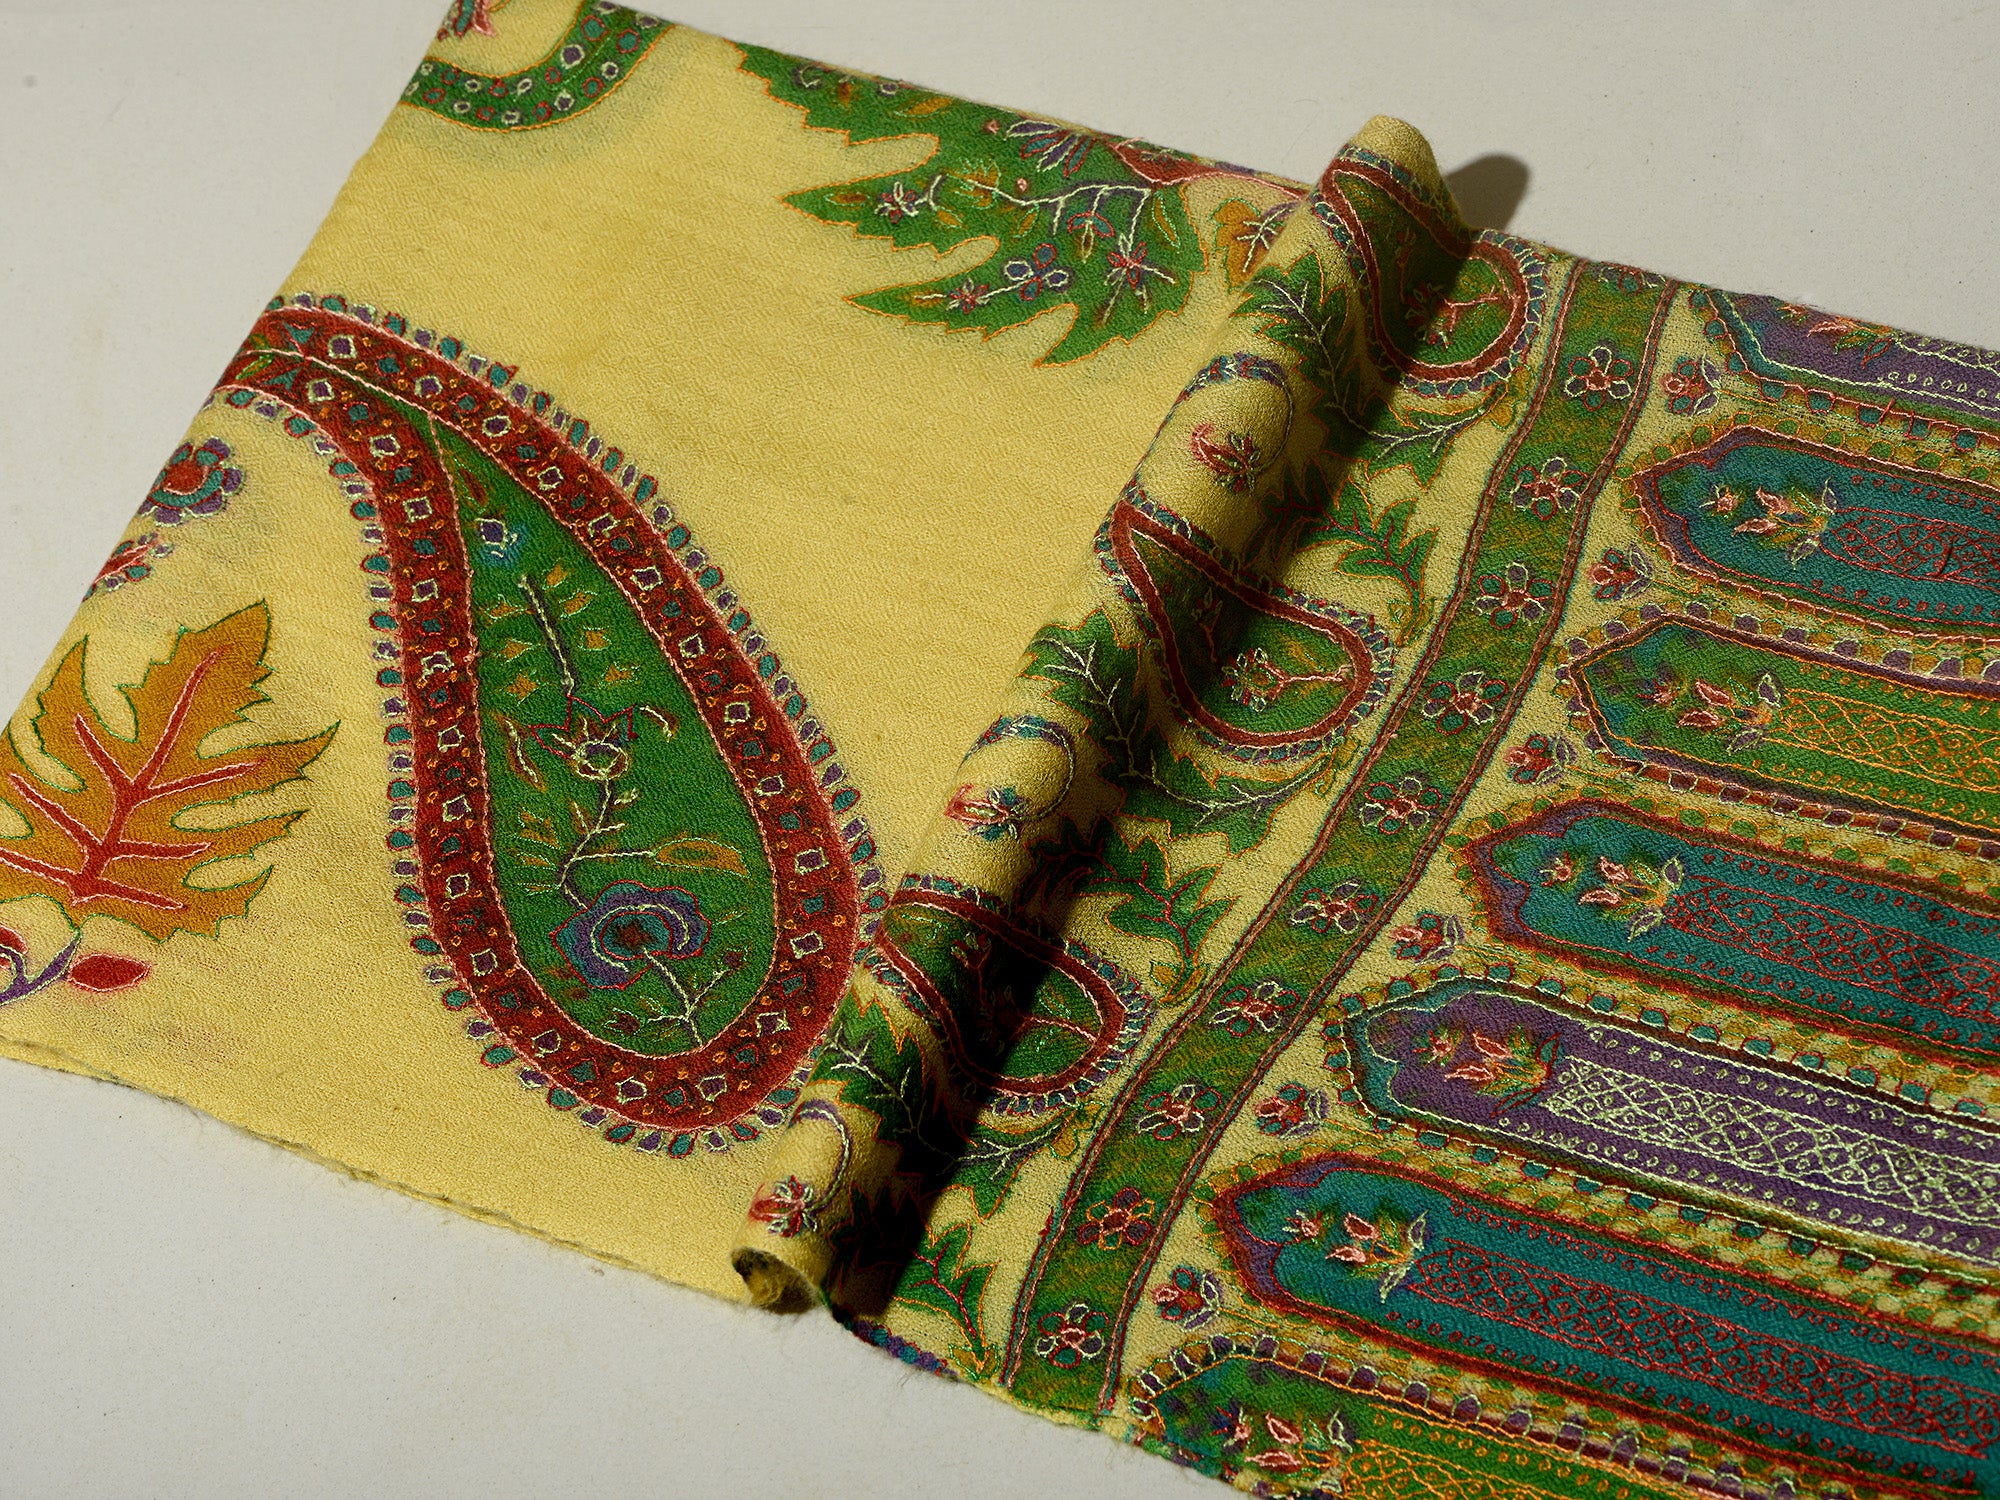 PAISLEY FLORAL Exquisite Kalamkari Kani Stole with Hand embroidery - Buttercup Yellow